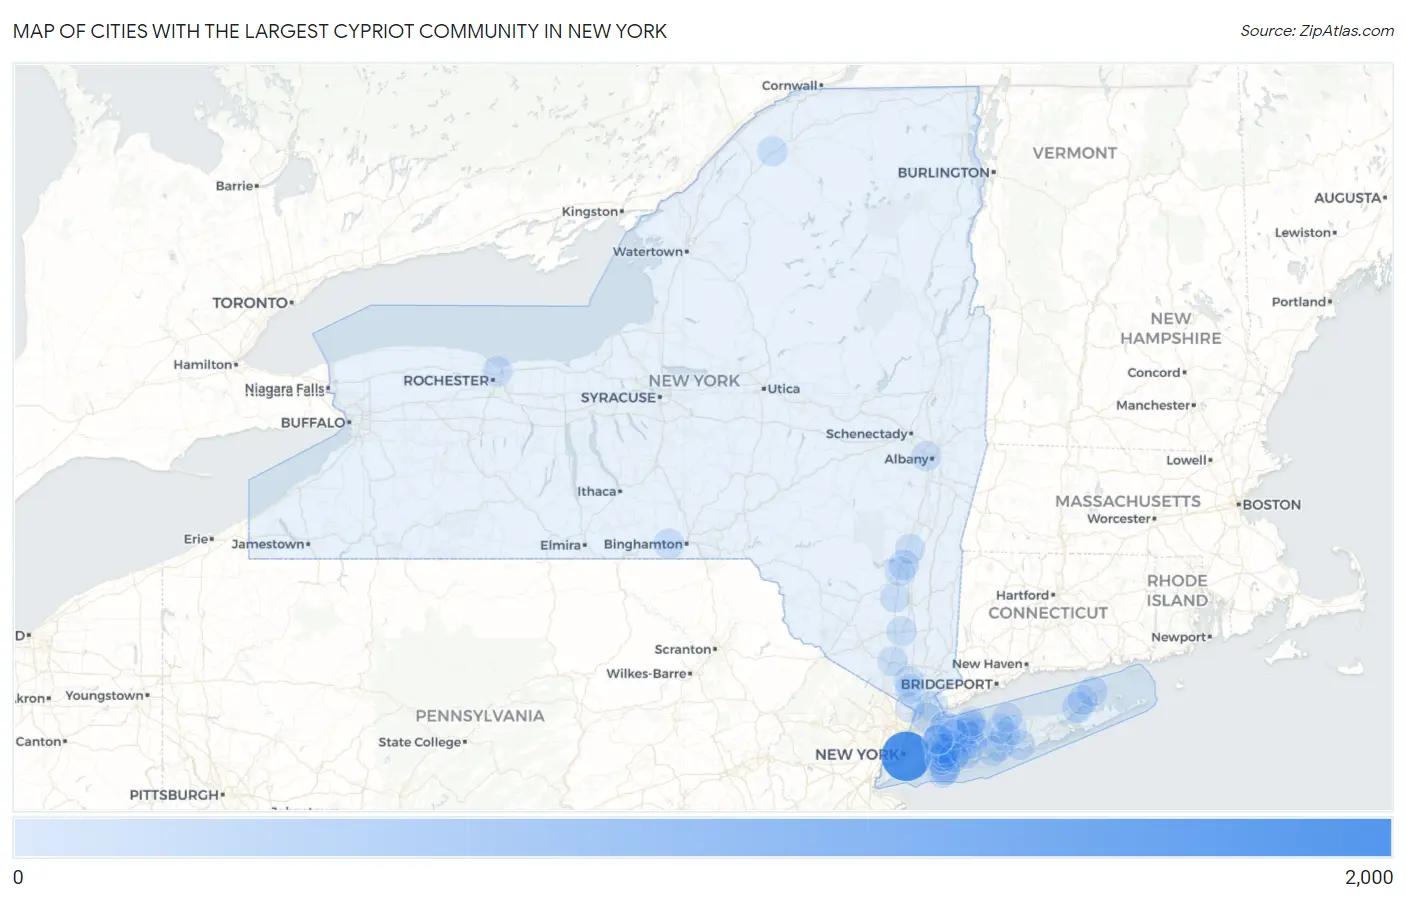 Cities with the Largest Cypriot Community in New York Map